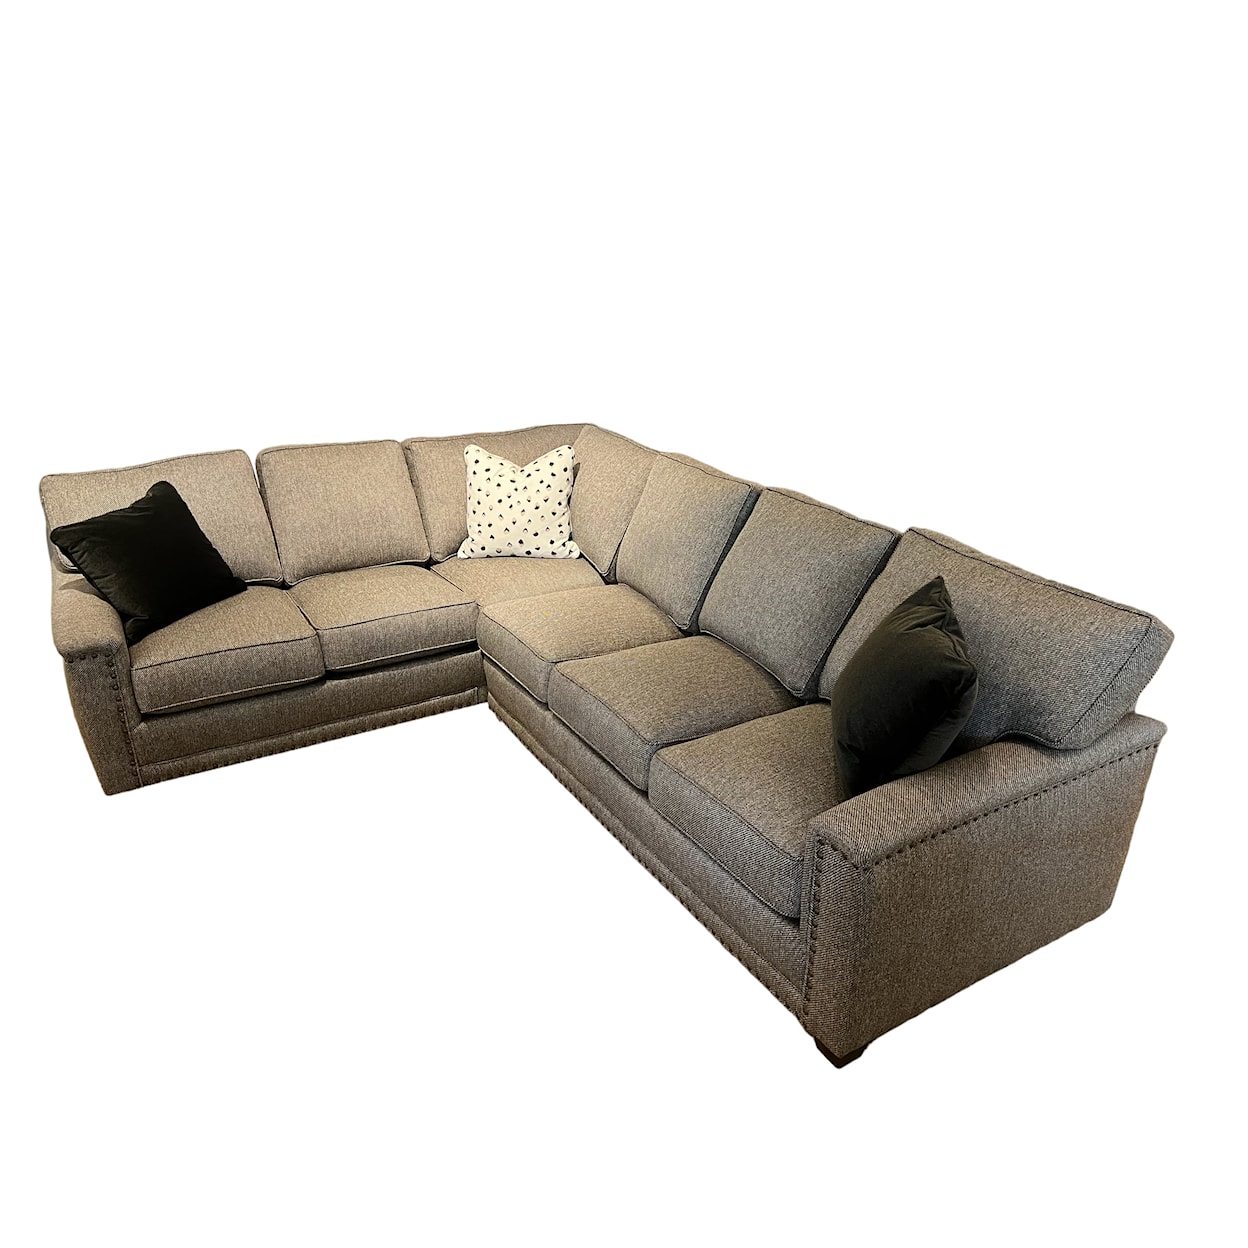 Rowe My Style I Group My Style I Two Piece Sectional